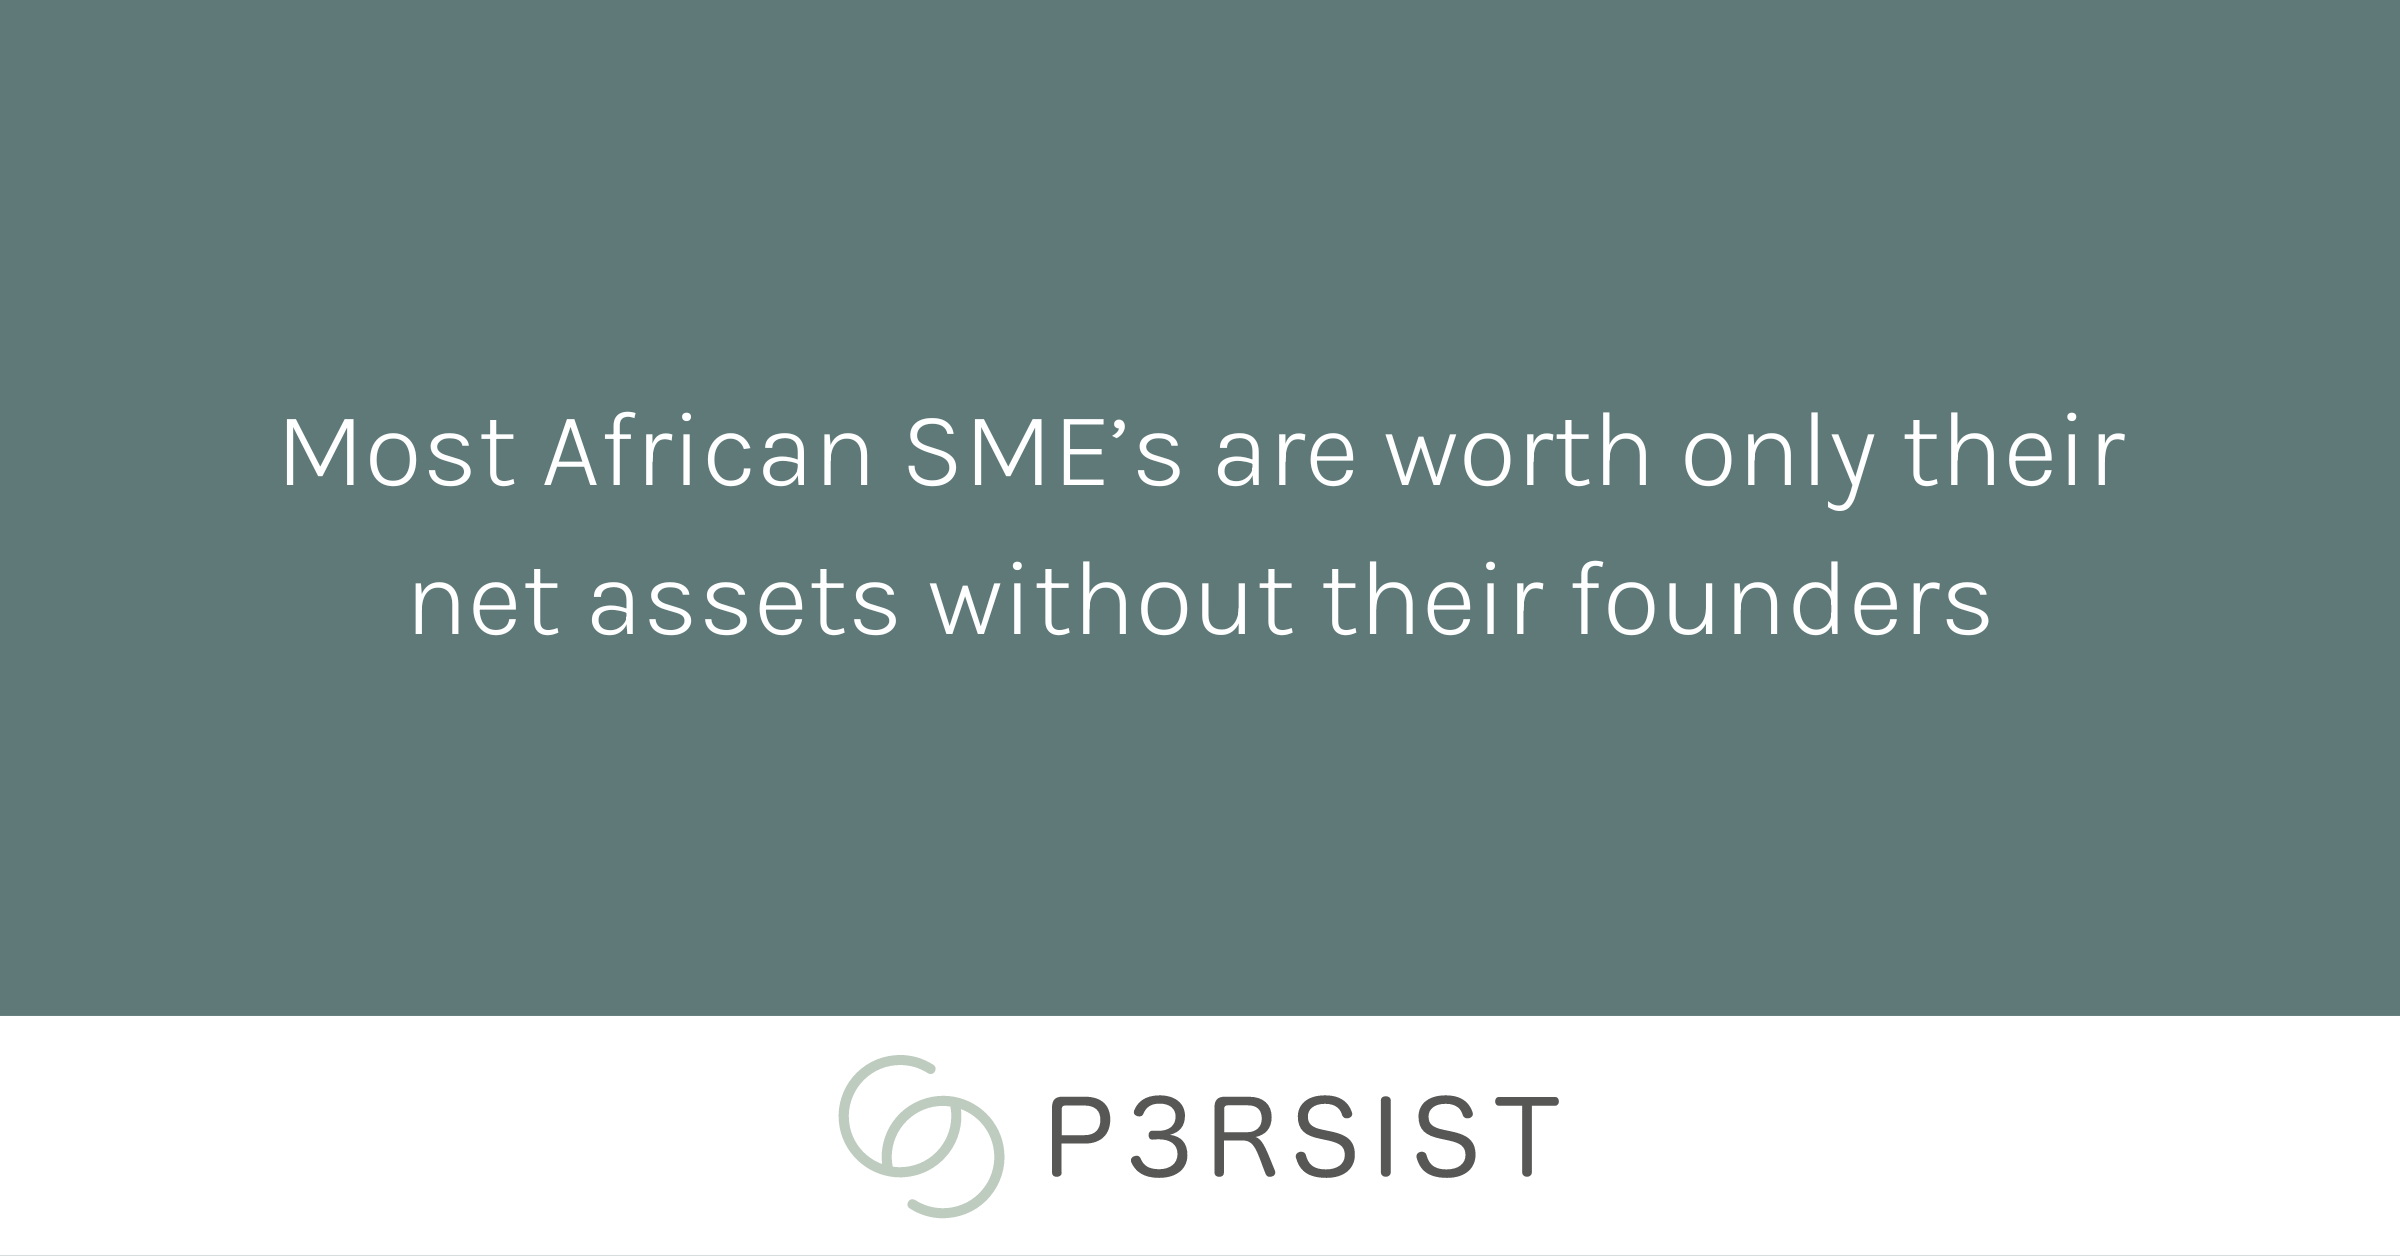 A quote on African agribusiness: "Most African SME's are worth only their net assets without their founders."